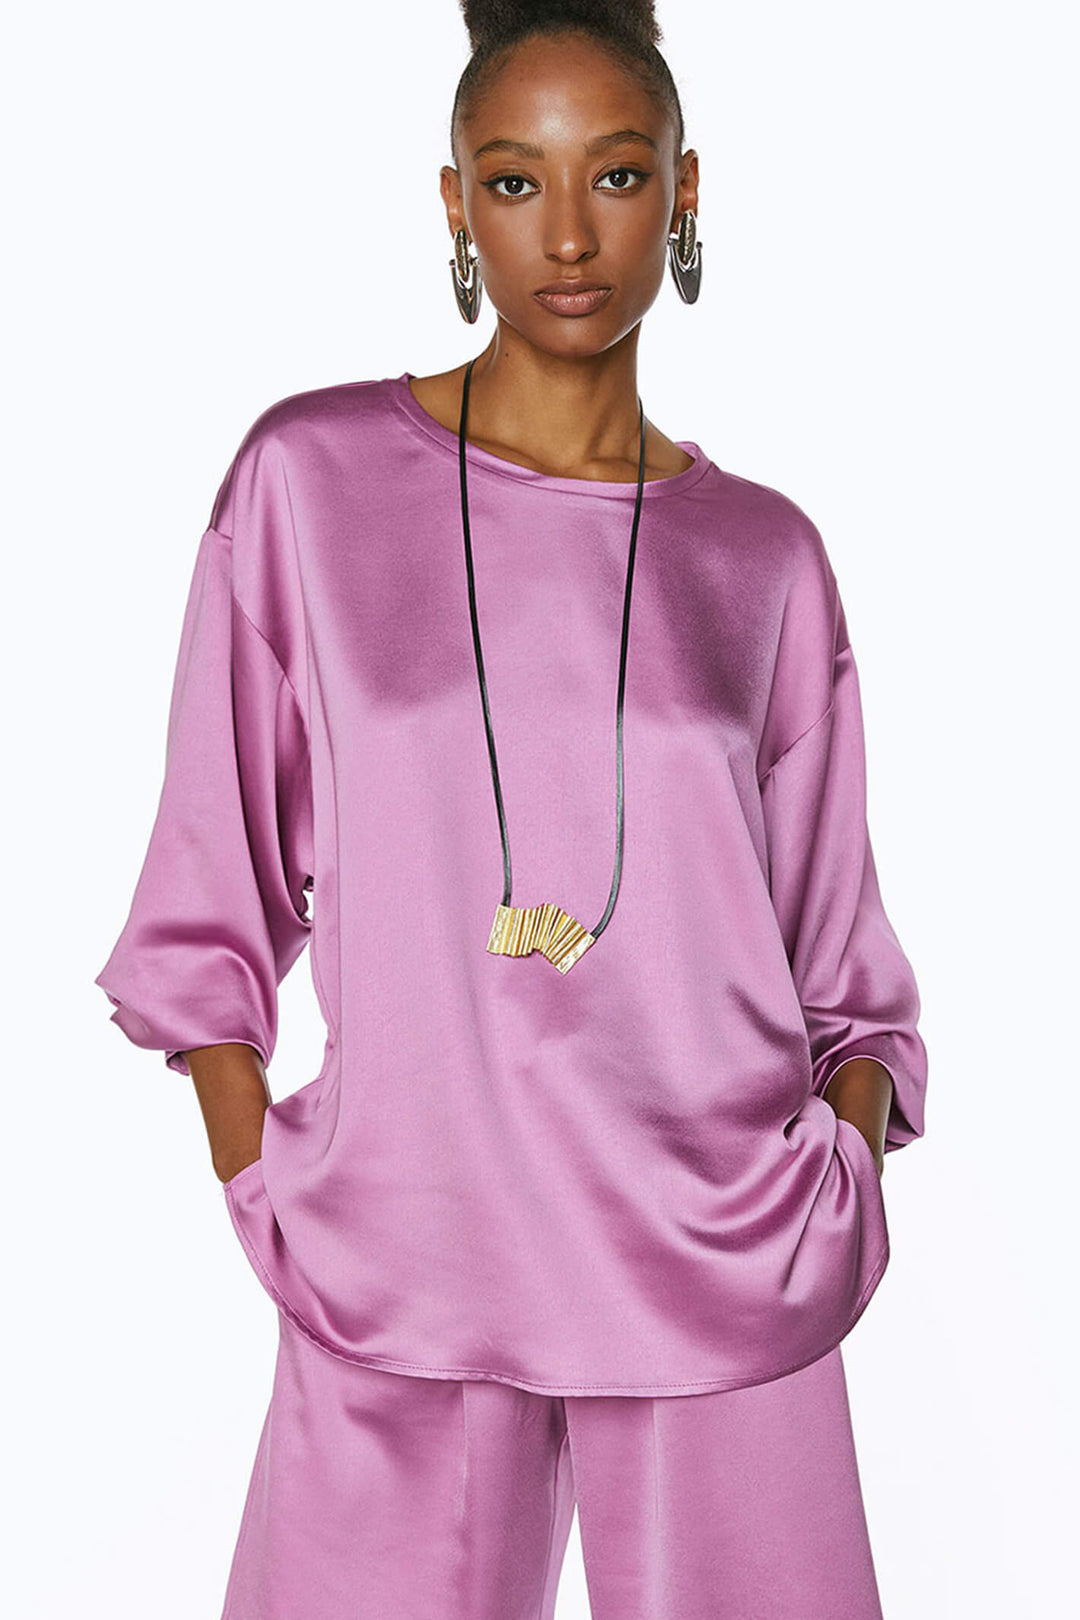 Access Fashion 2085-134 Grape Pink Satin Long Sleeve Top - Experience Boutique